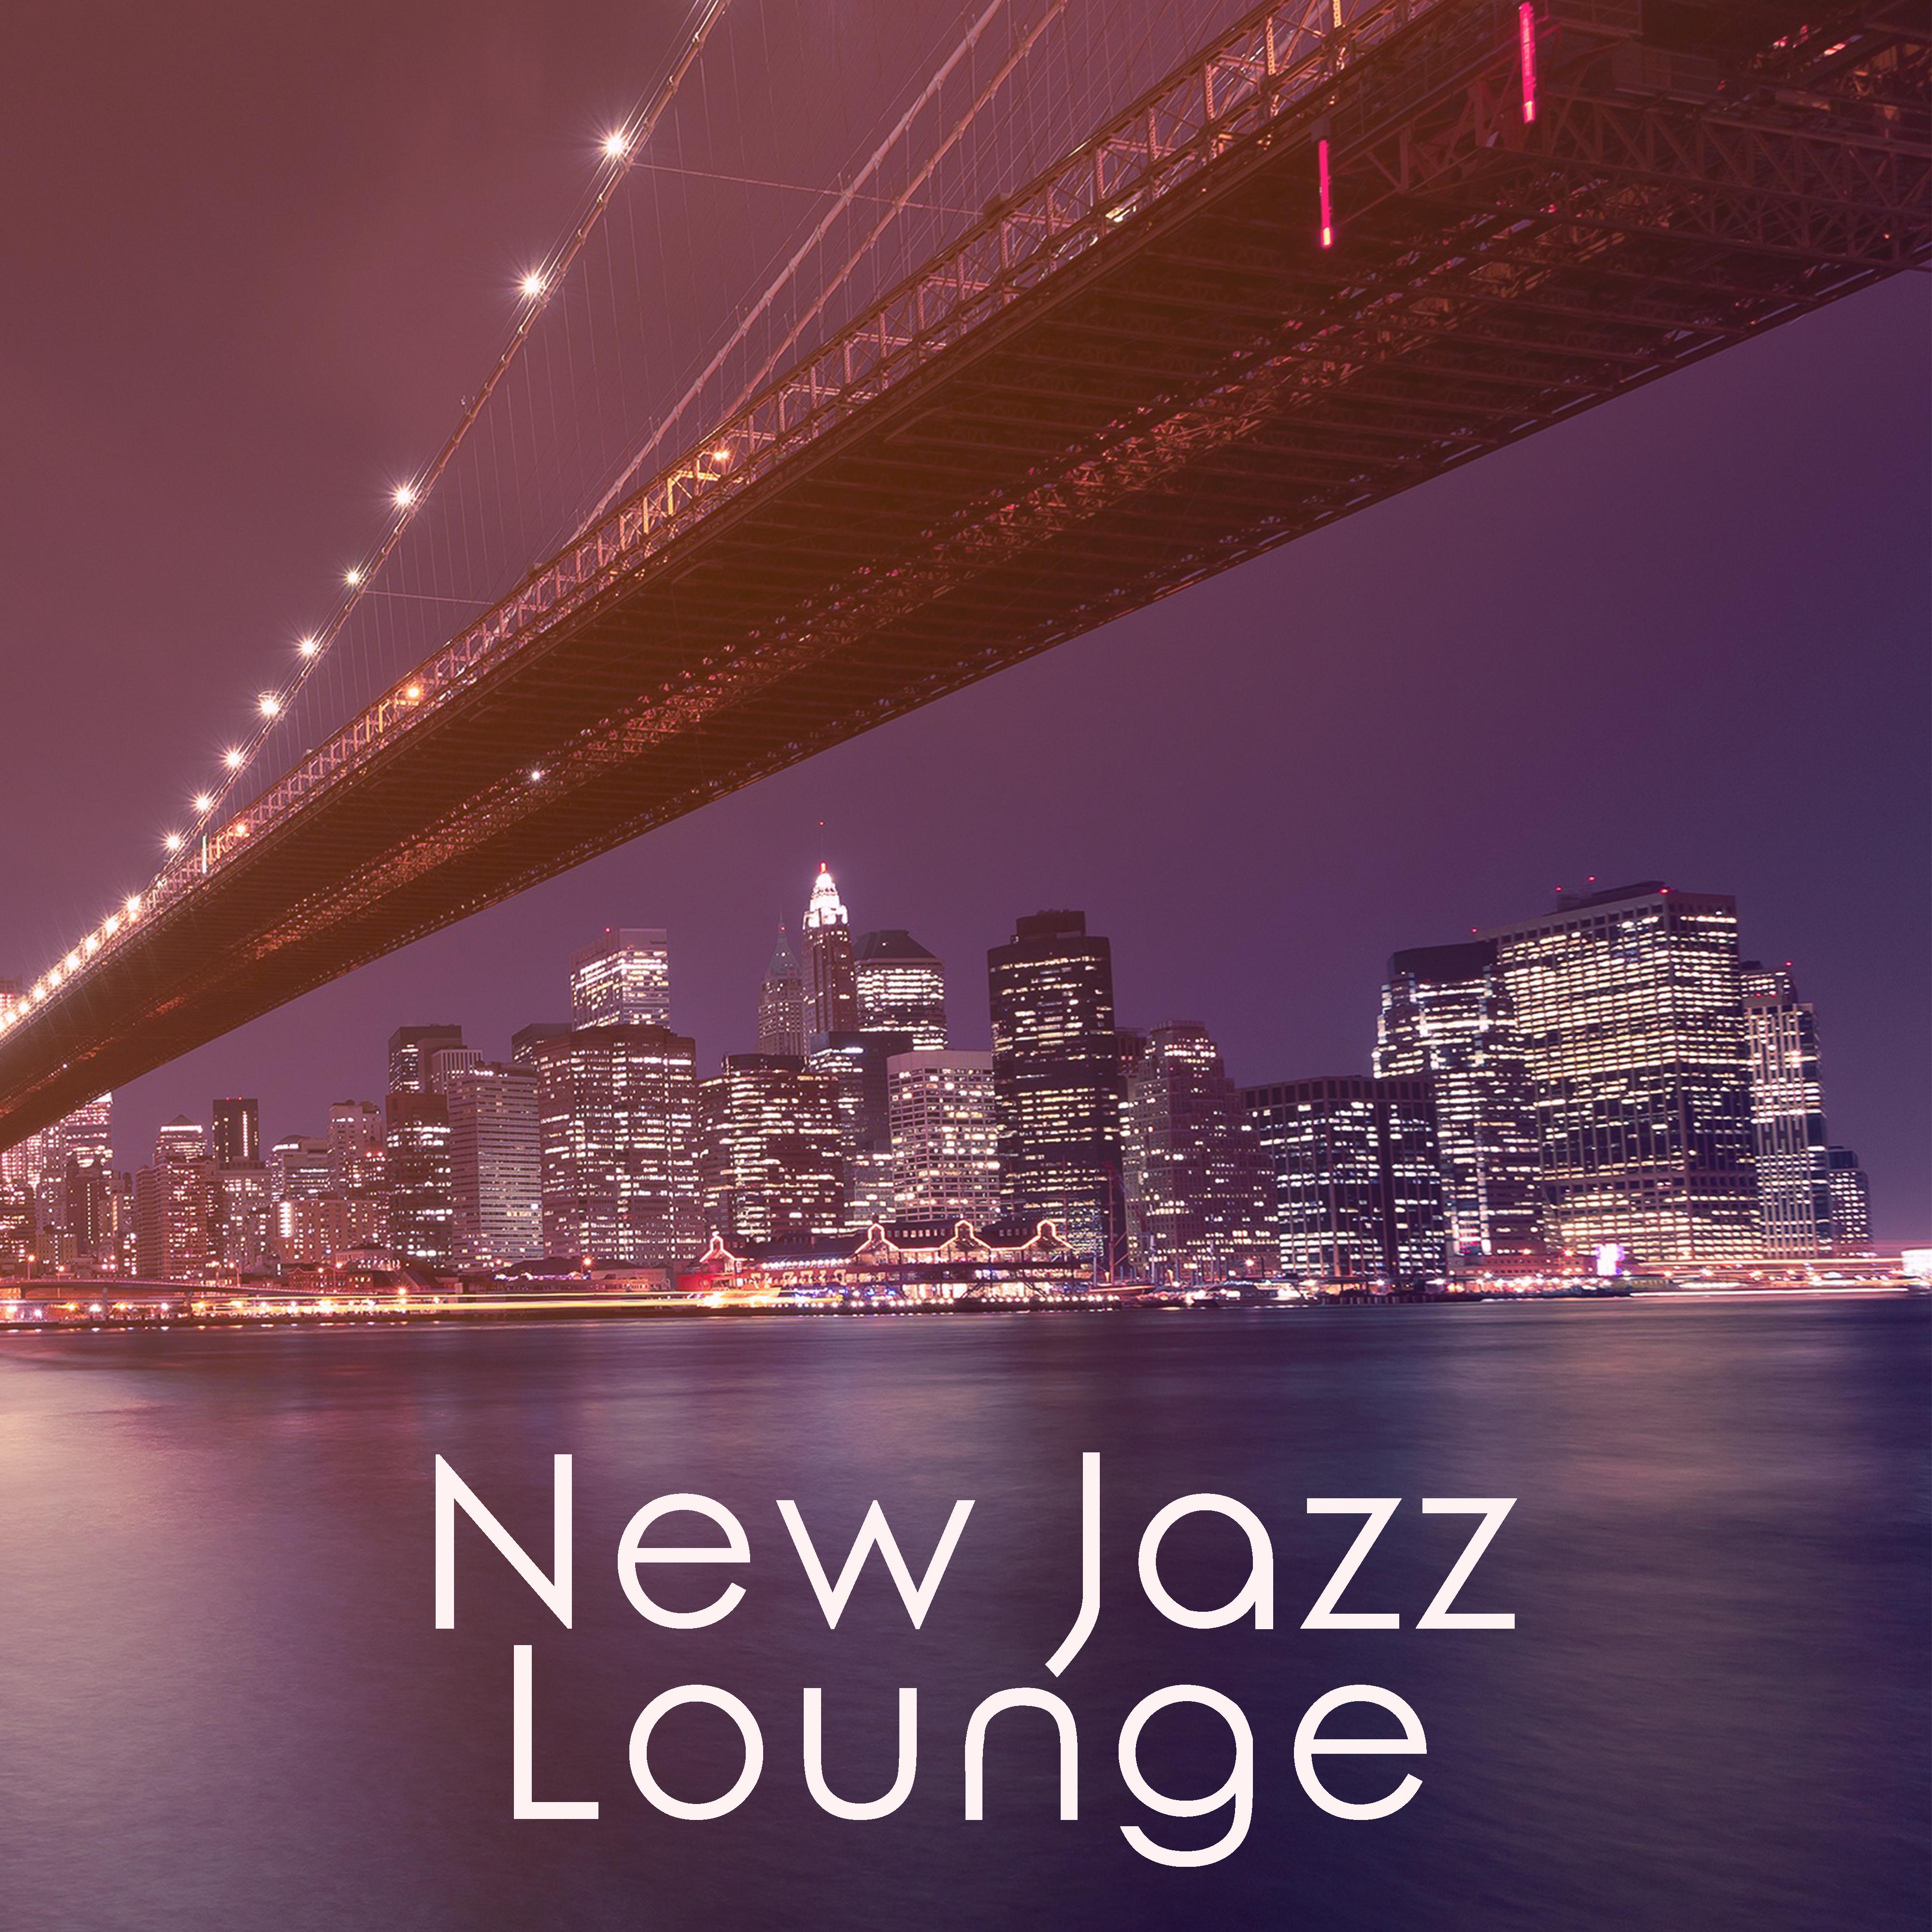 New Jazz Lounge - Summer Jazz Session, Instrumental Ambient, Relaxing Jazz